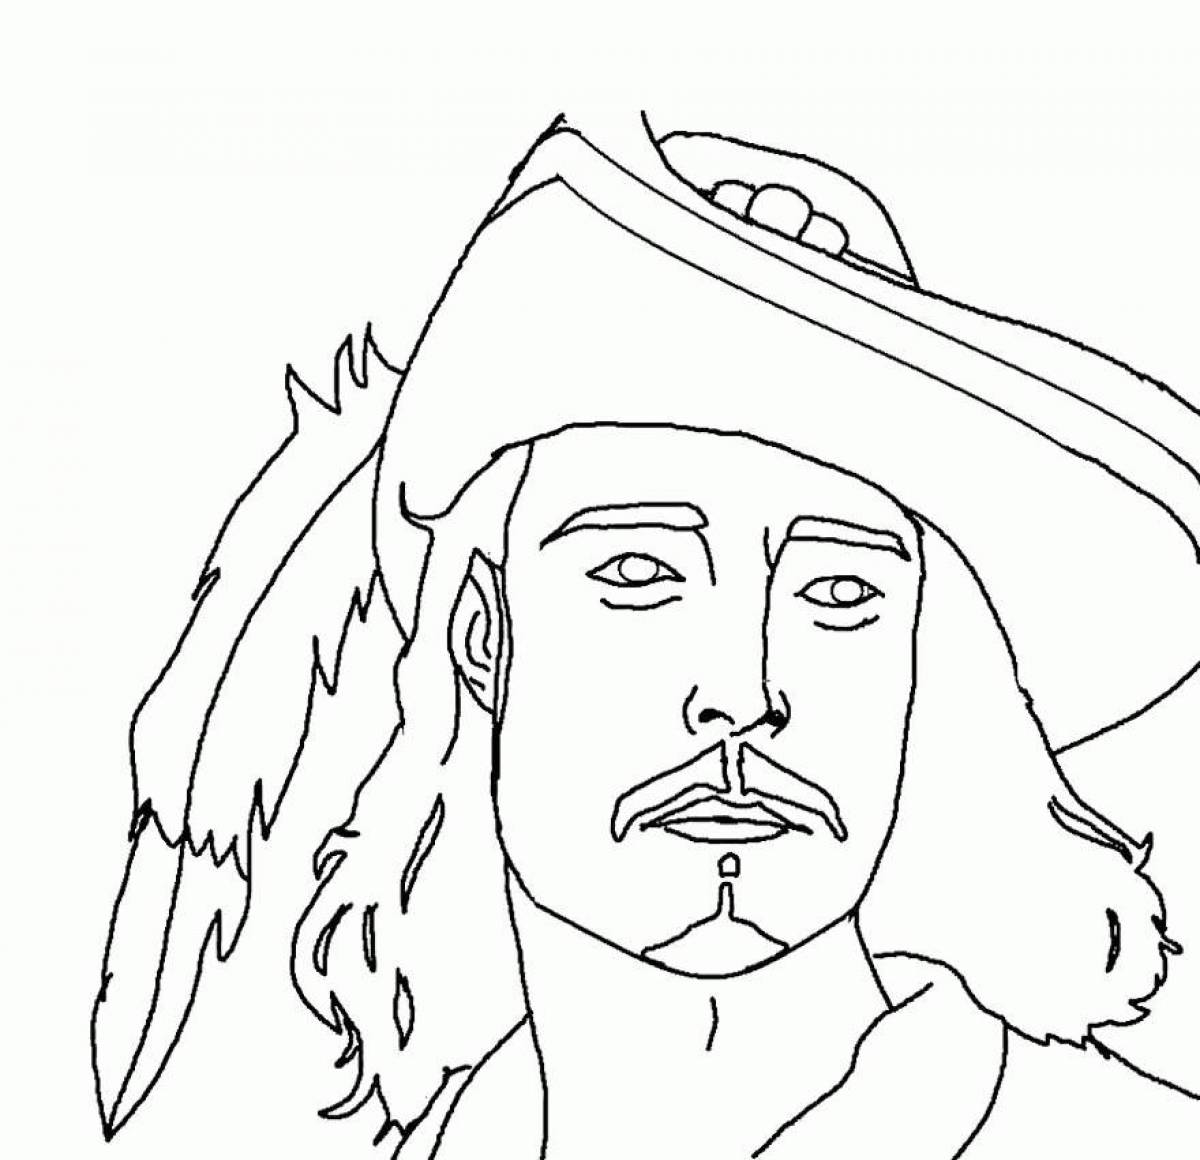 Jack Sparrow's amazing coloring book